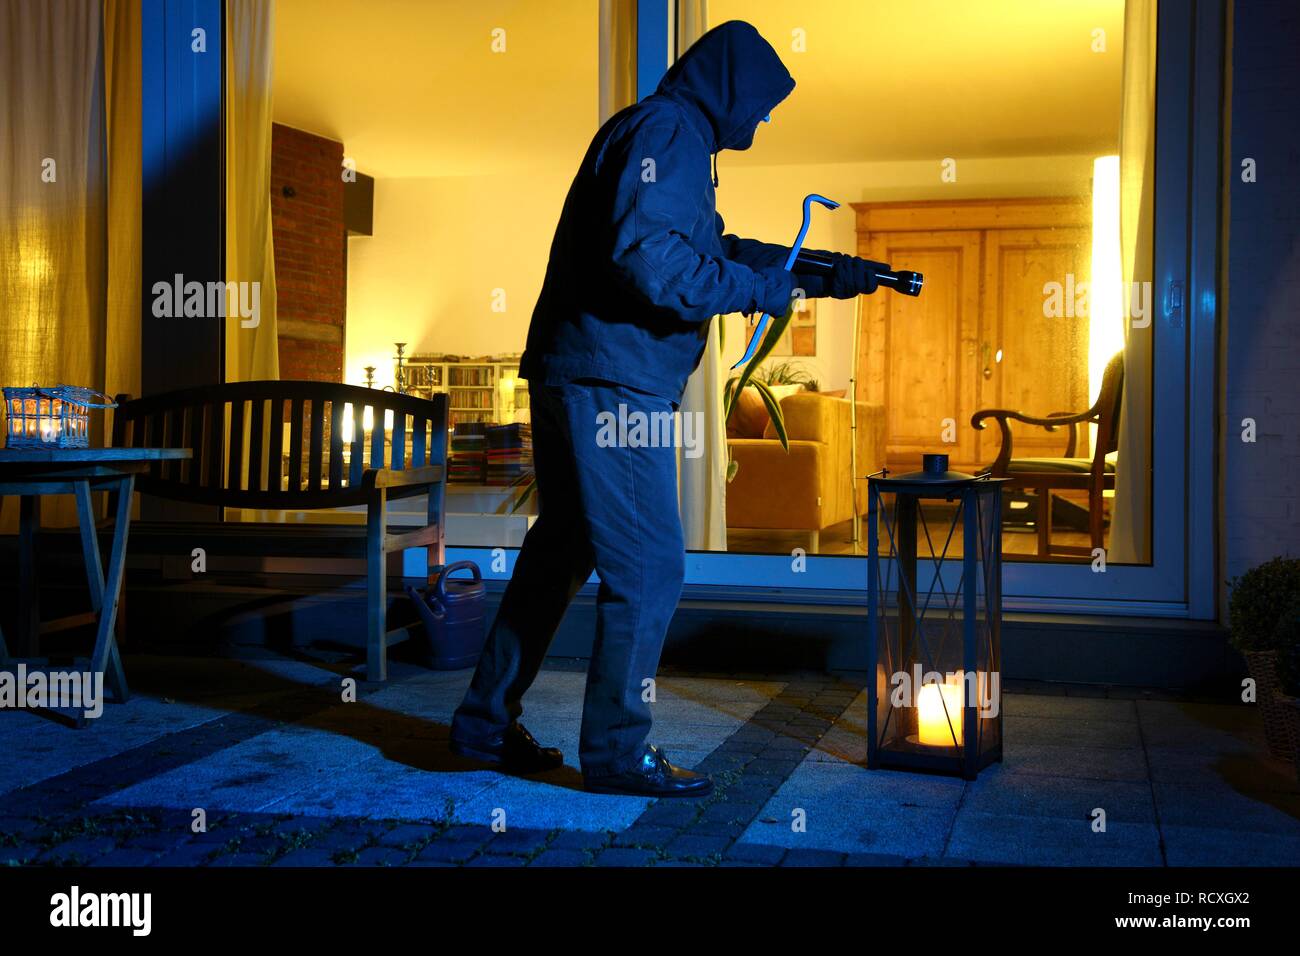 Burglar wants to forcefully enter a house, sneaks onto the terrace, symbolic image for domestic burglary Stock Photo